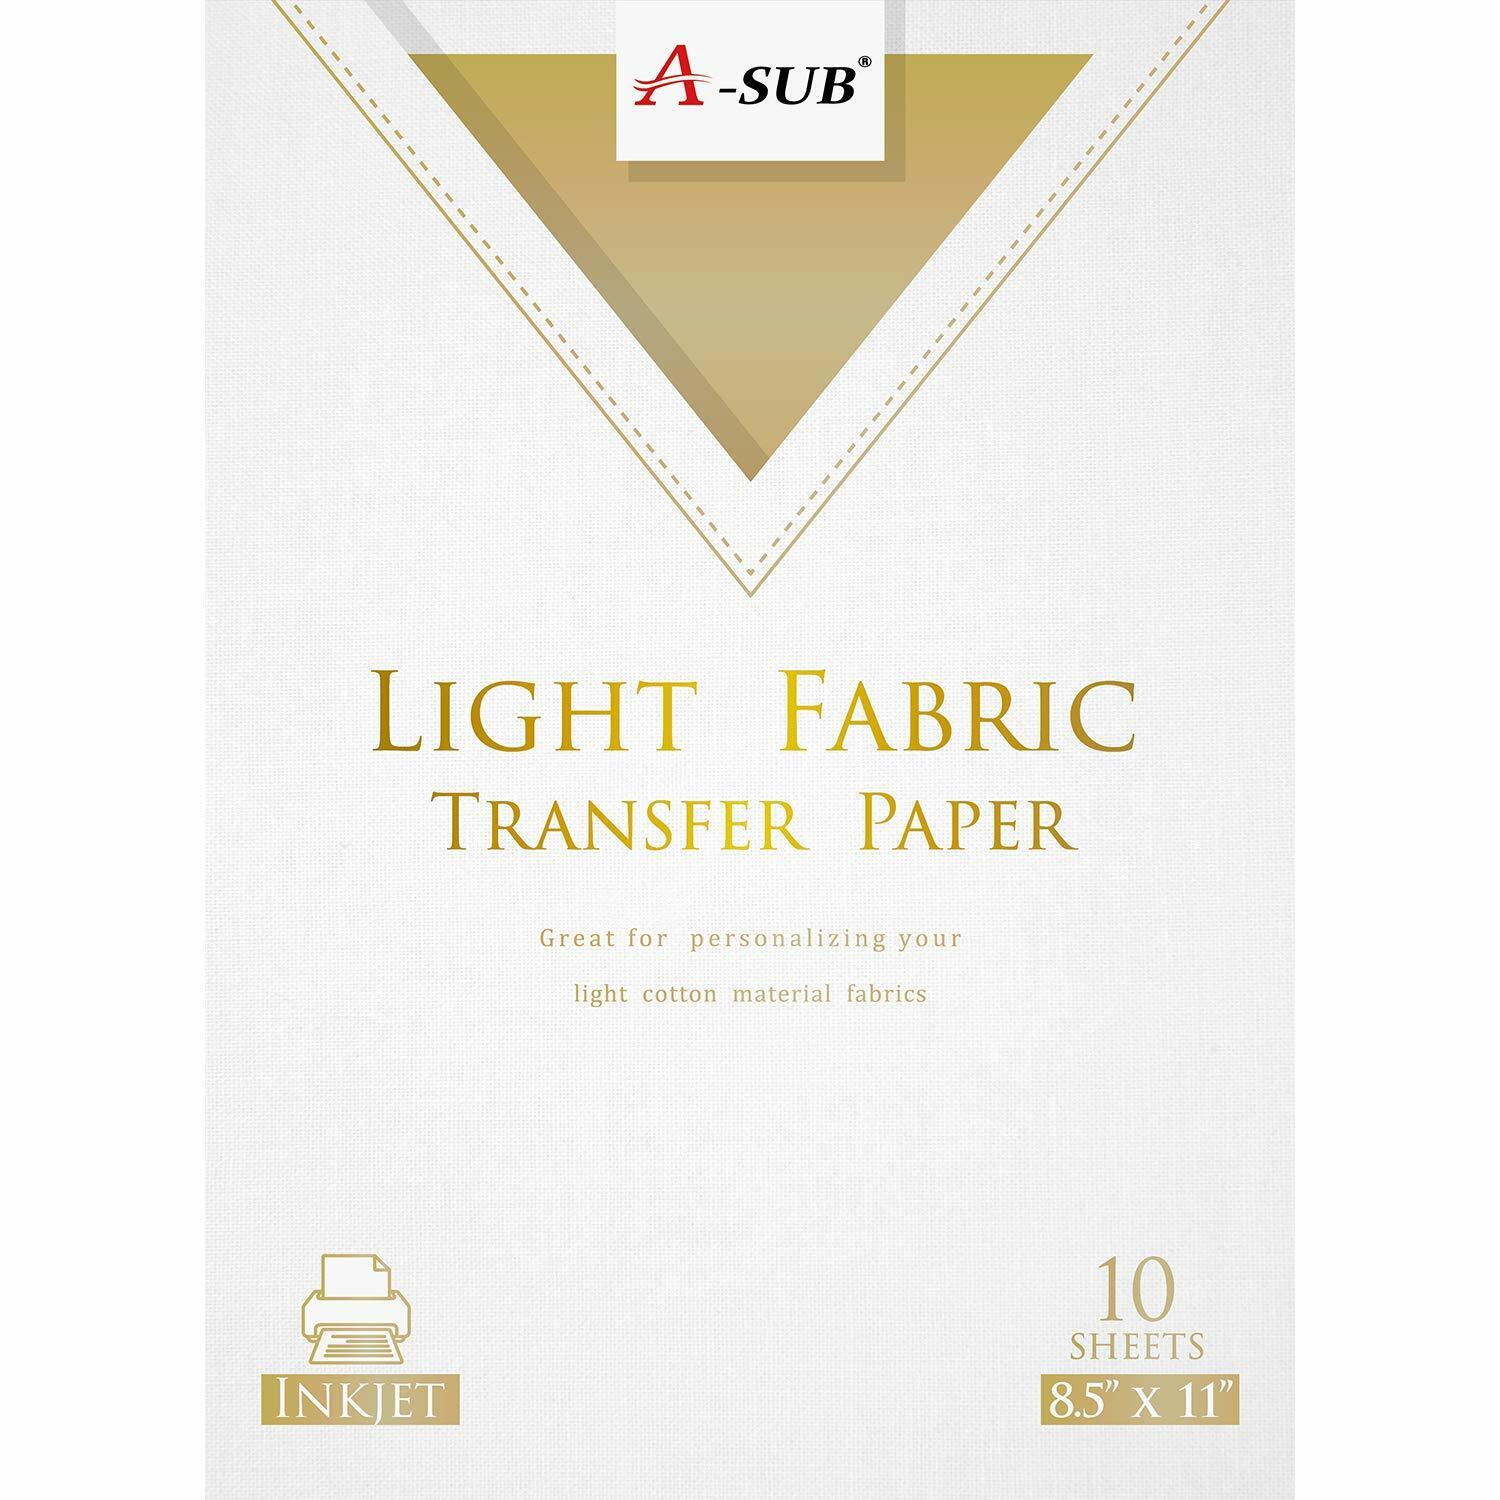 Iron-On Transfer Paper for Light Fabric